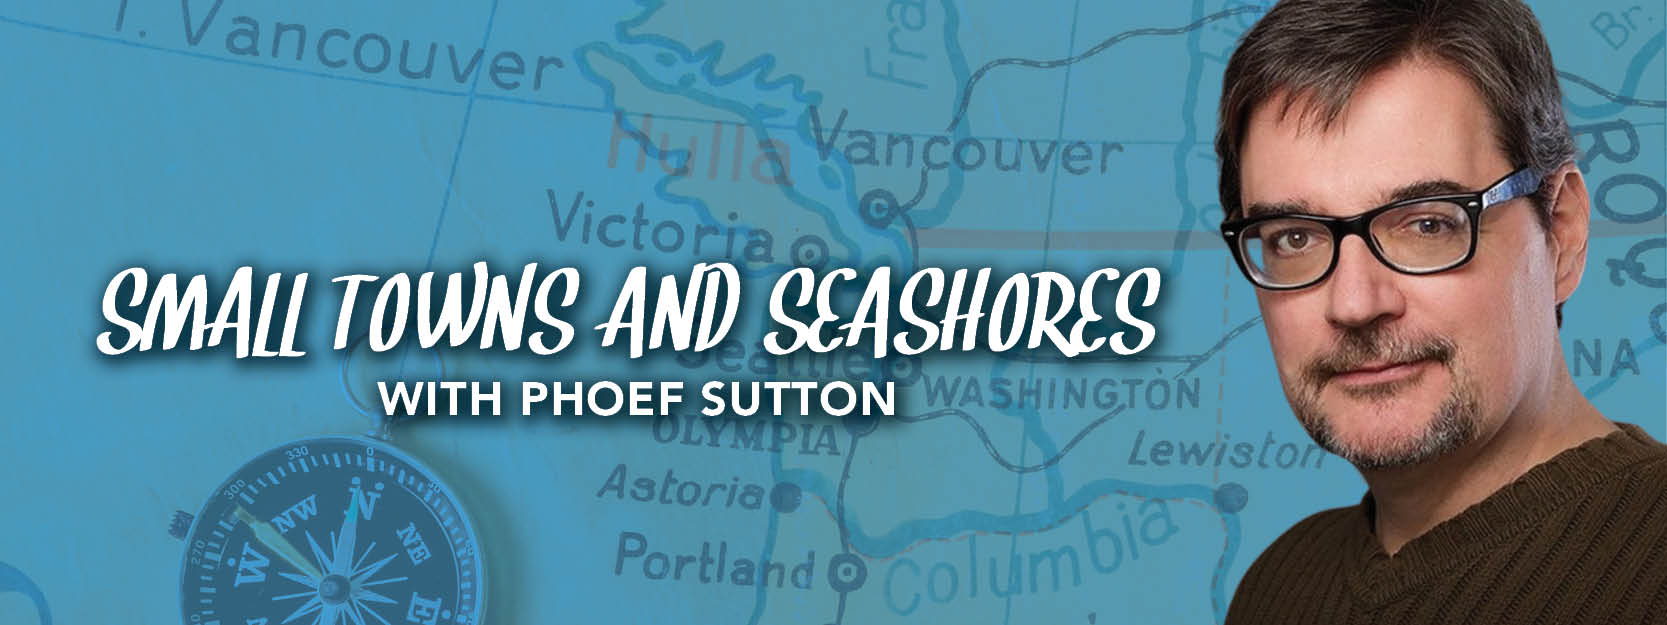 Small Towns and Seashores with Phoef Sutton 